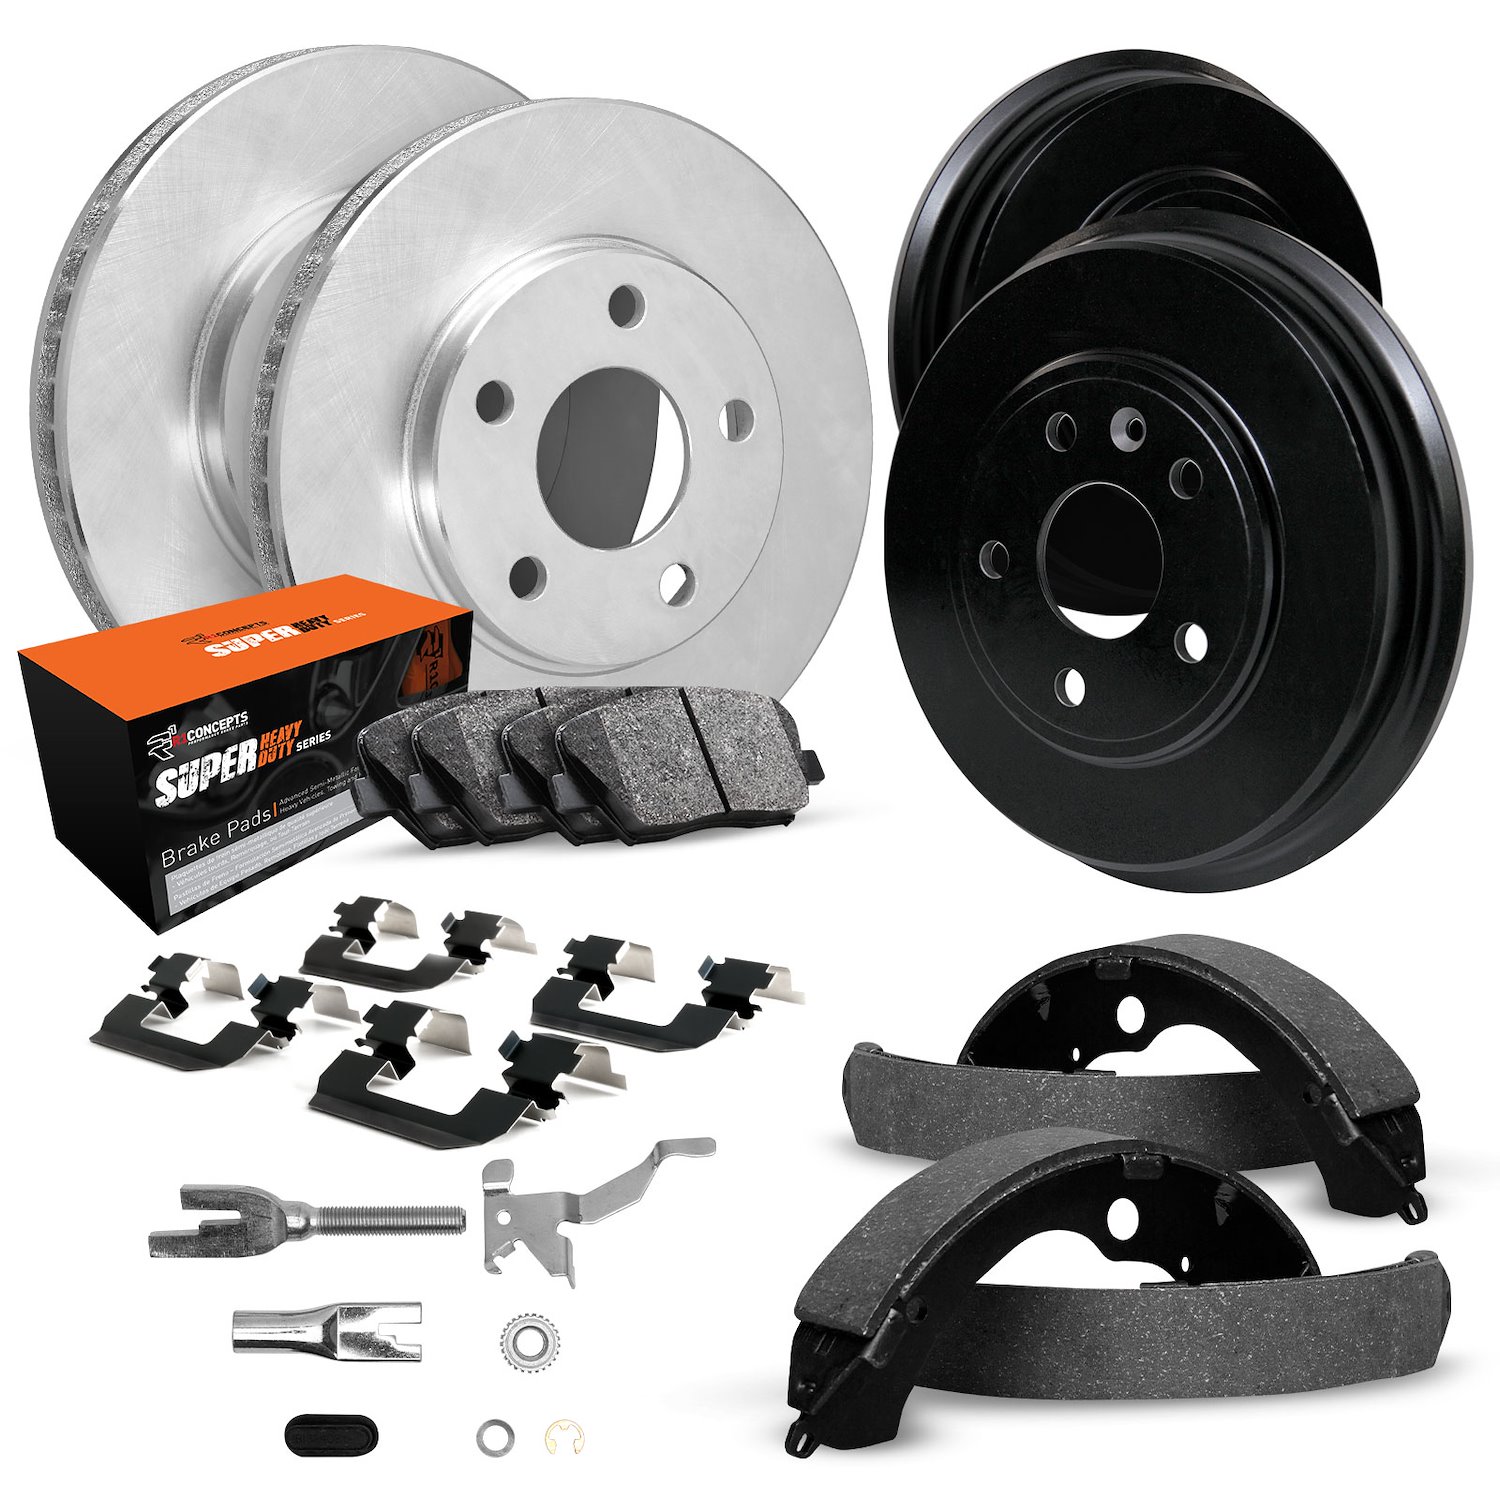 E-Line Blank Brake Rotor & Drum Set w/Super-Duty Pads, Shoes, Hardware, & Adjusters, 1971-1971 GM, Position: Front & Rear